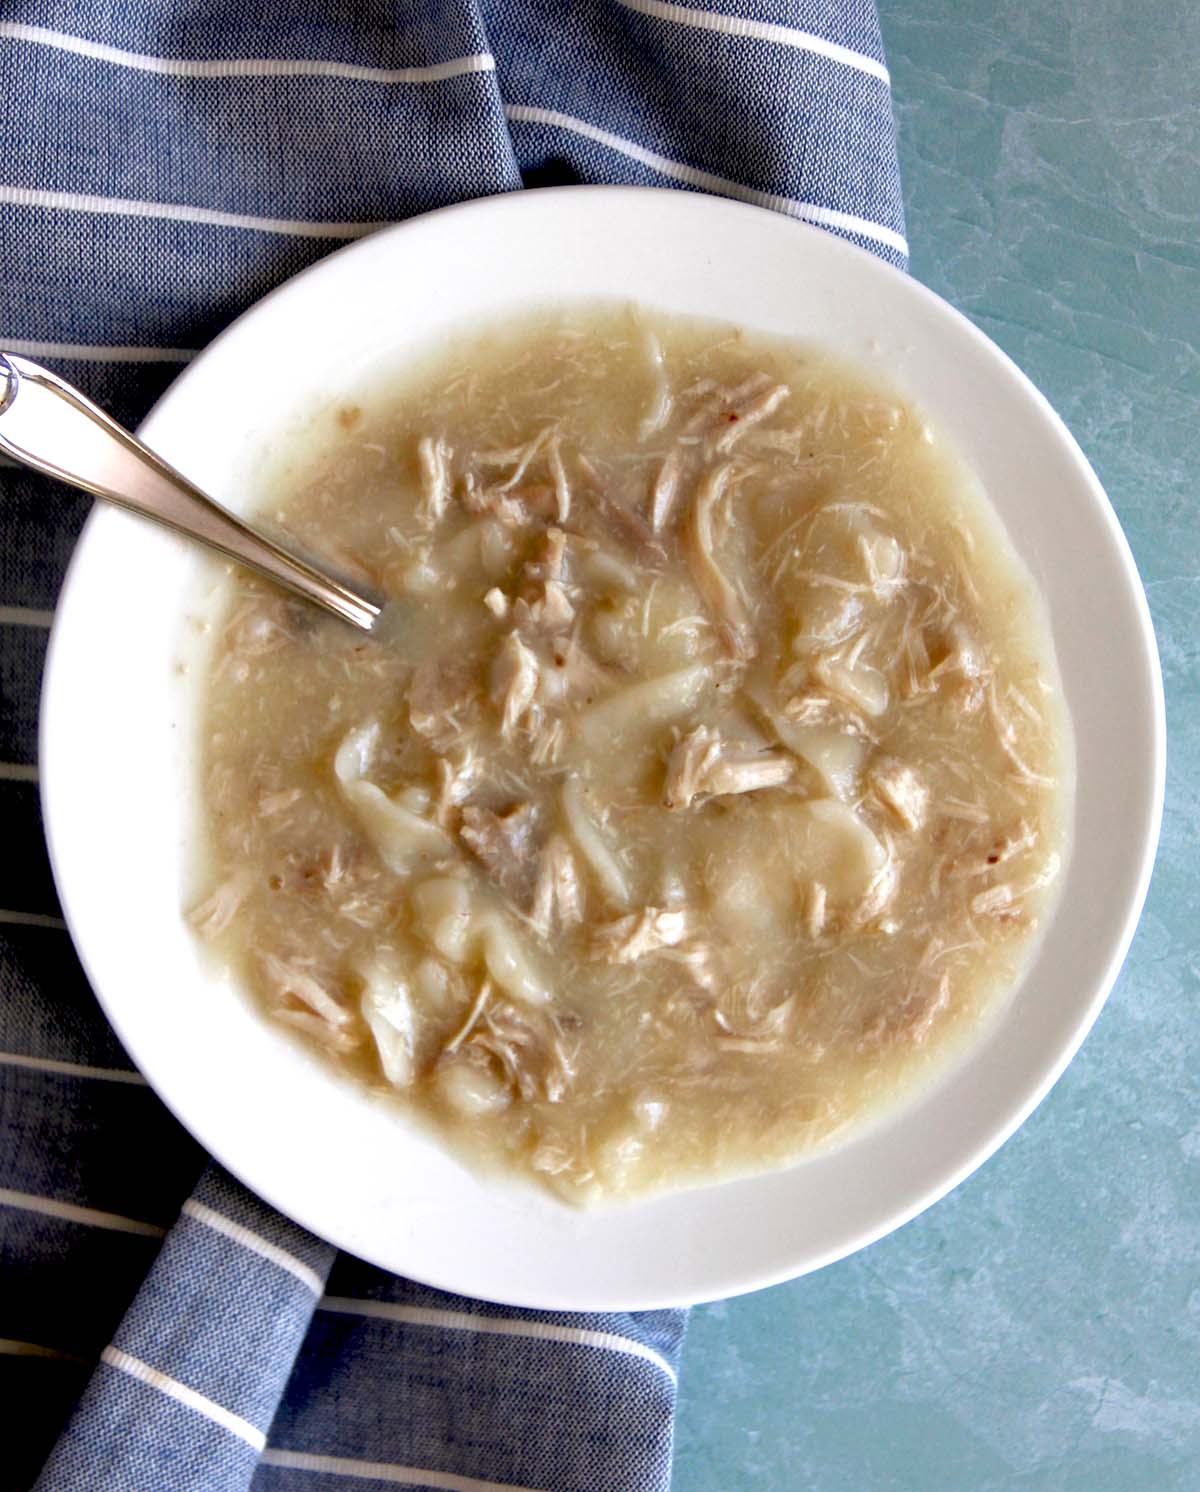 A bowl of Southern style chicken and dumplings.